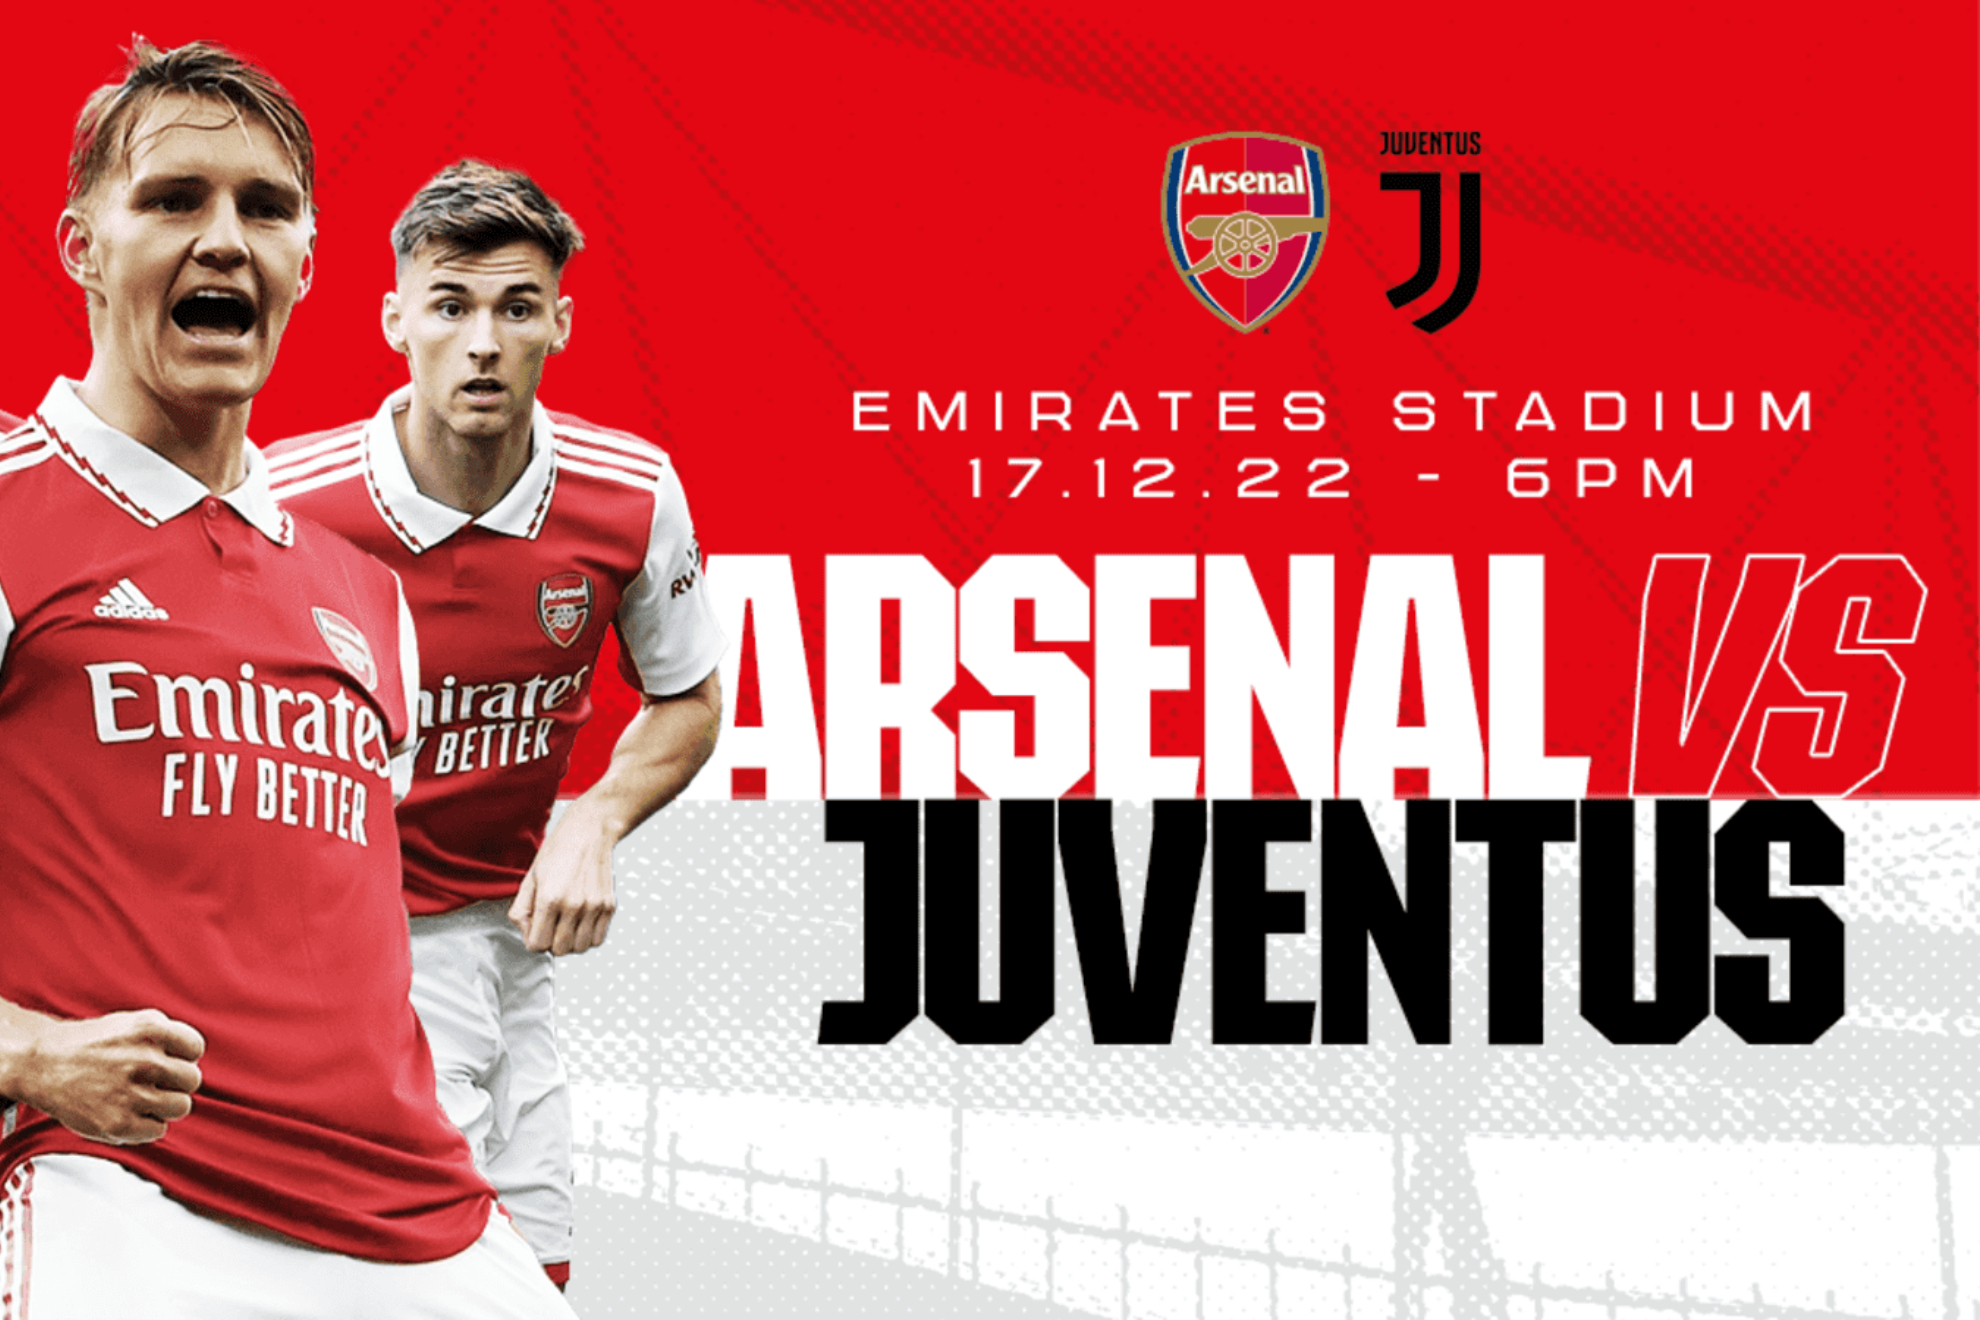 This is how you can play a special role in the Arsenal ys Juventus friendly